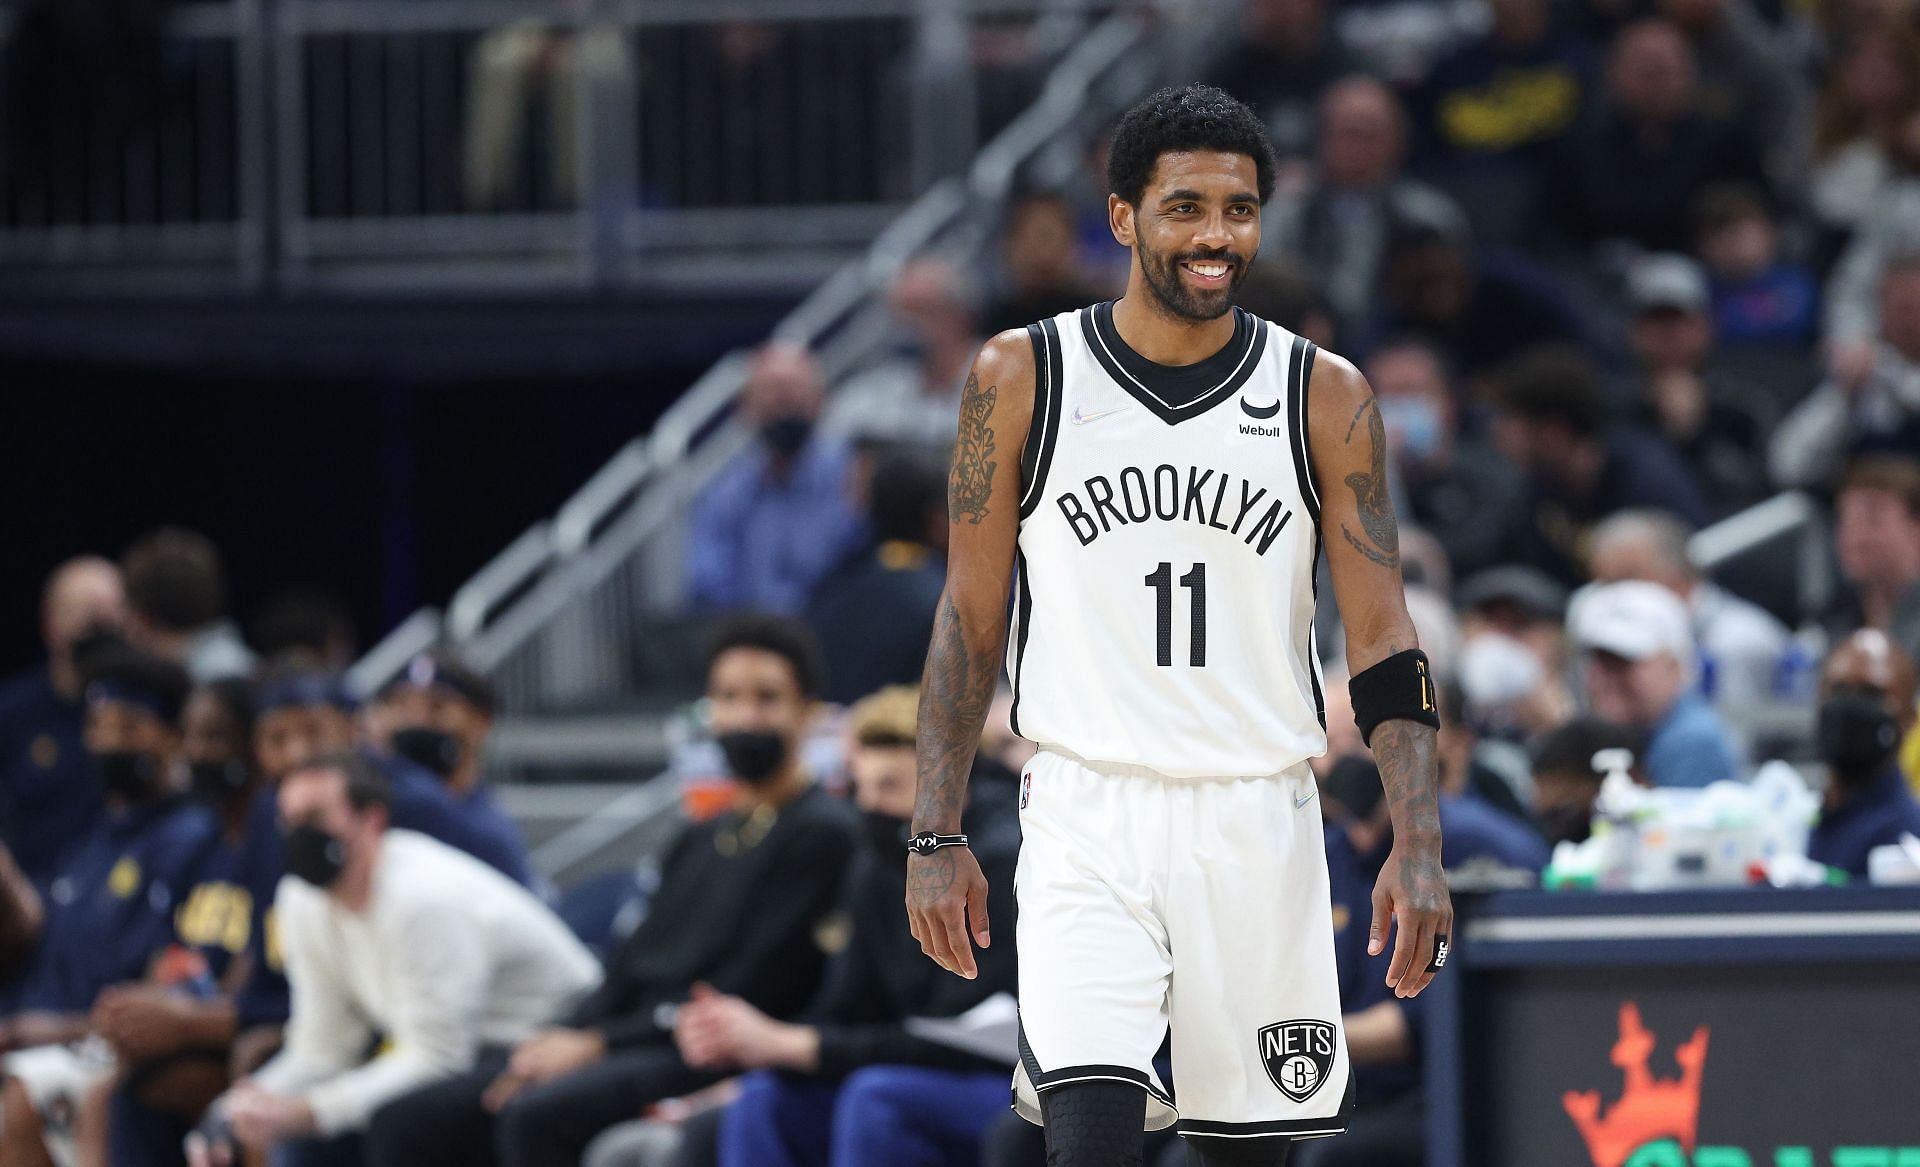 Brooklyn Nets vs. Indiana Pacers; Kyrie Irving smiling in his first game back